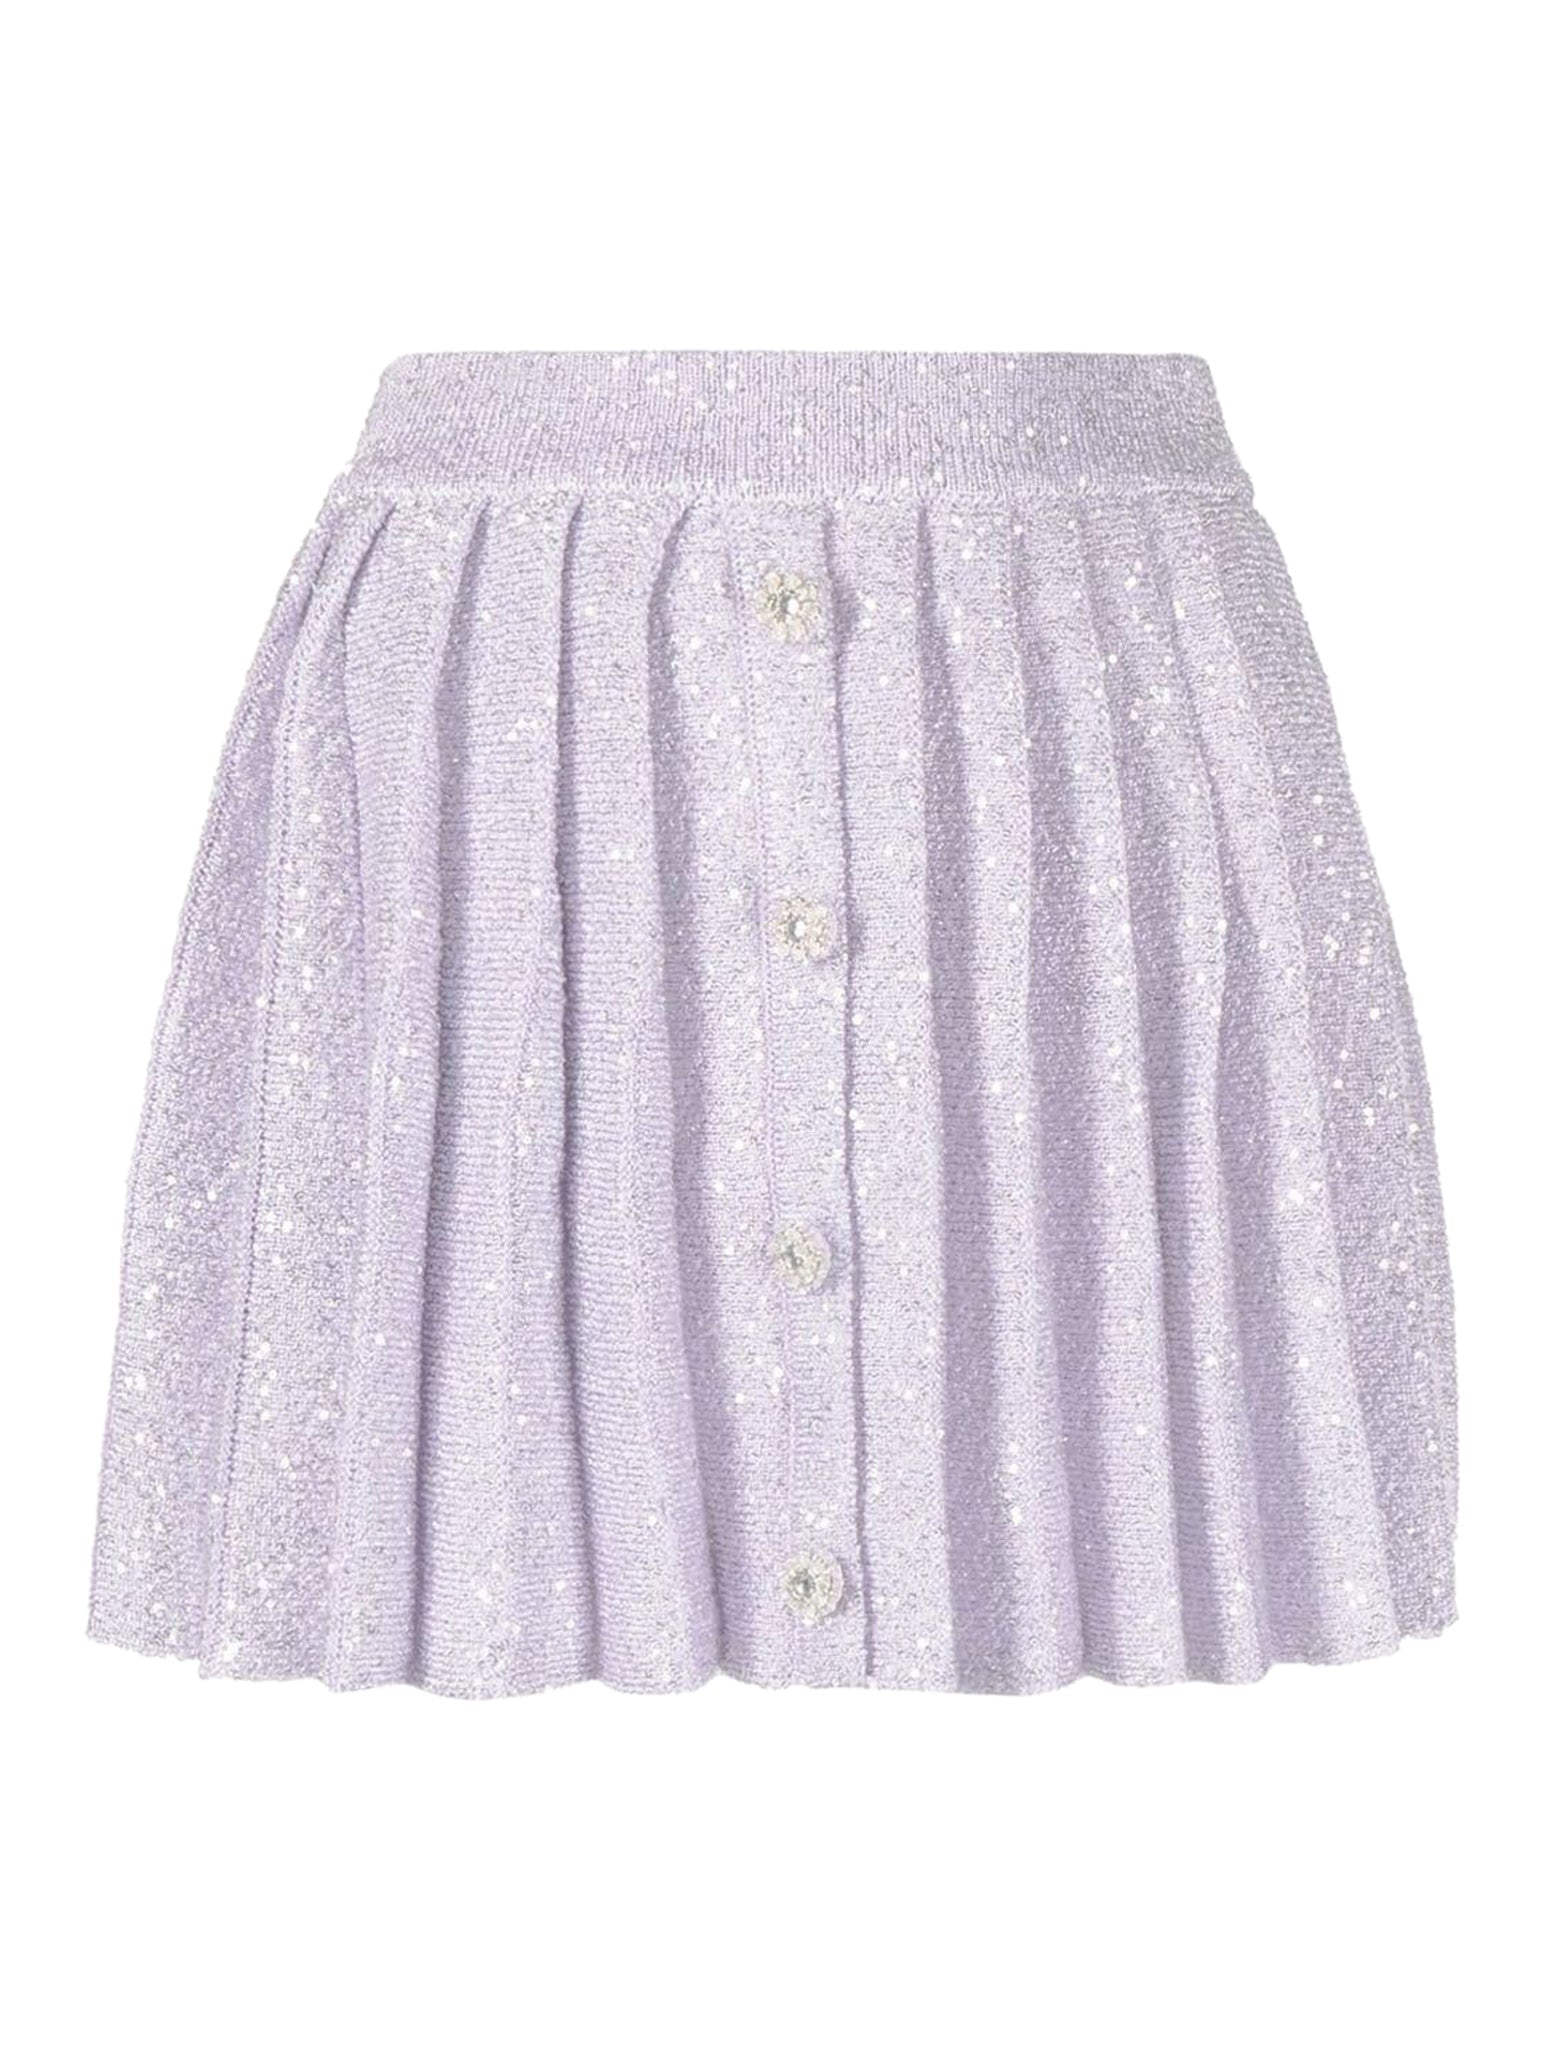 LILAC SEQUIN PLEATED KNIT SKIRT